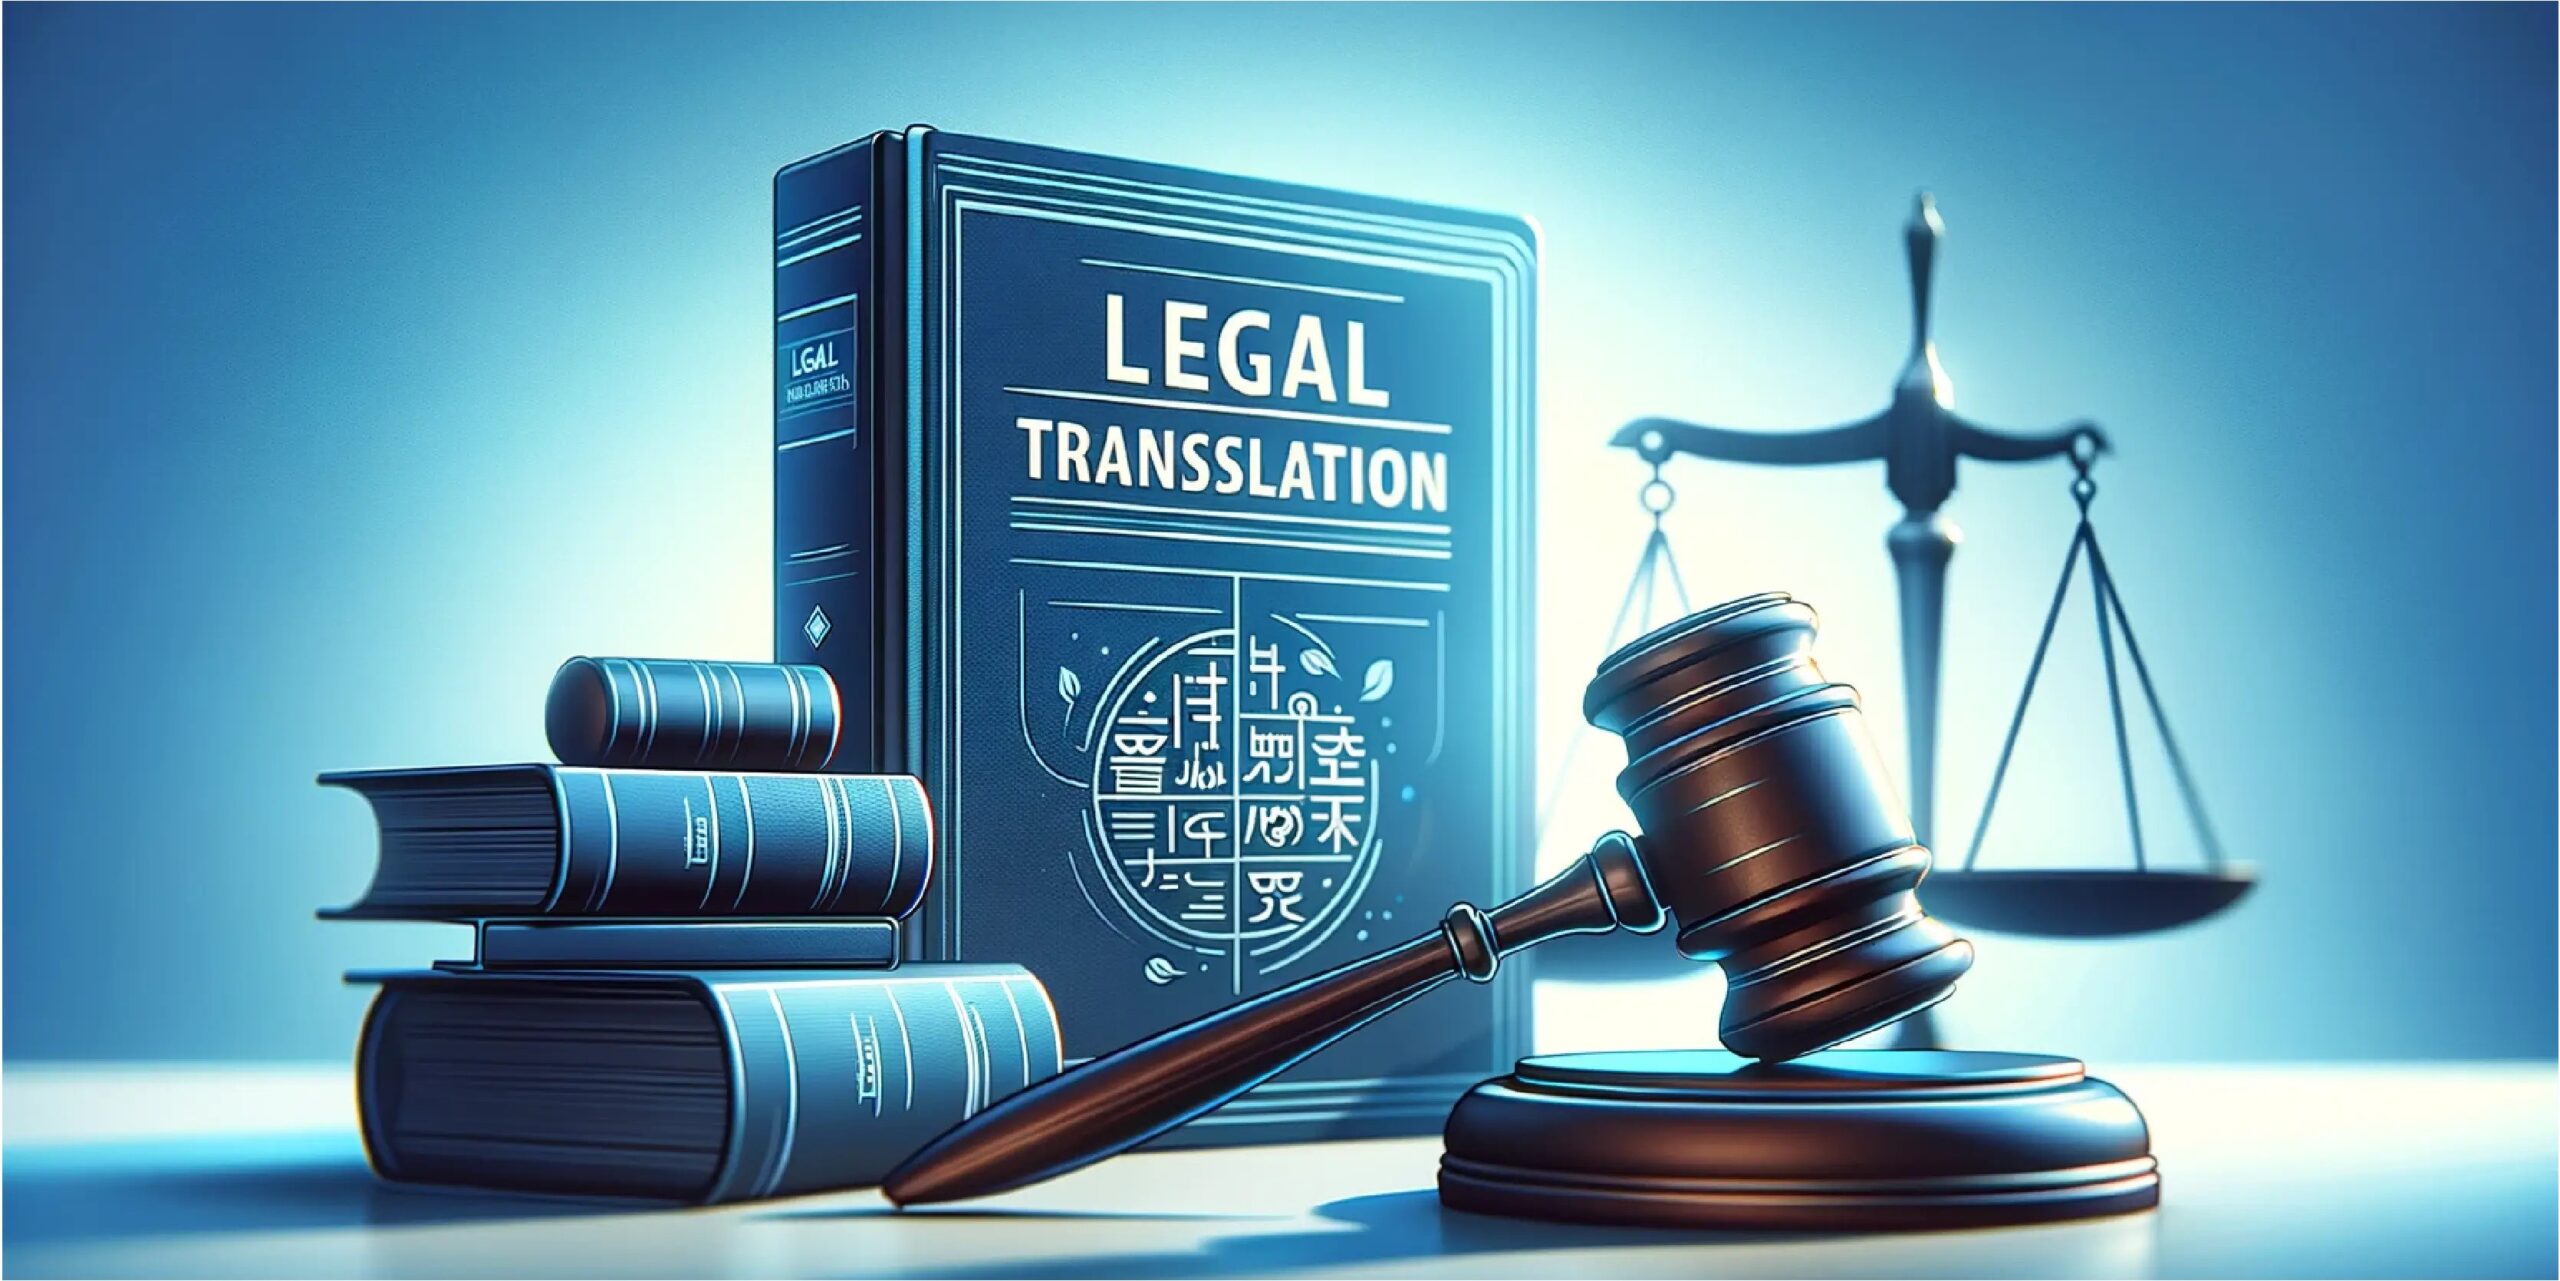 Why Should You Hire a Legal Translation Agency?